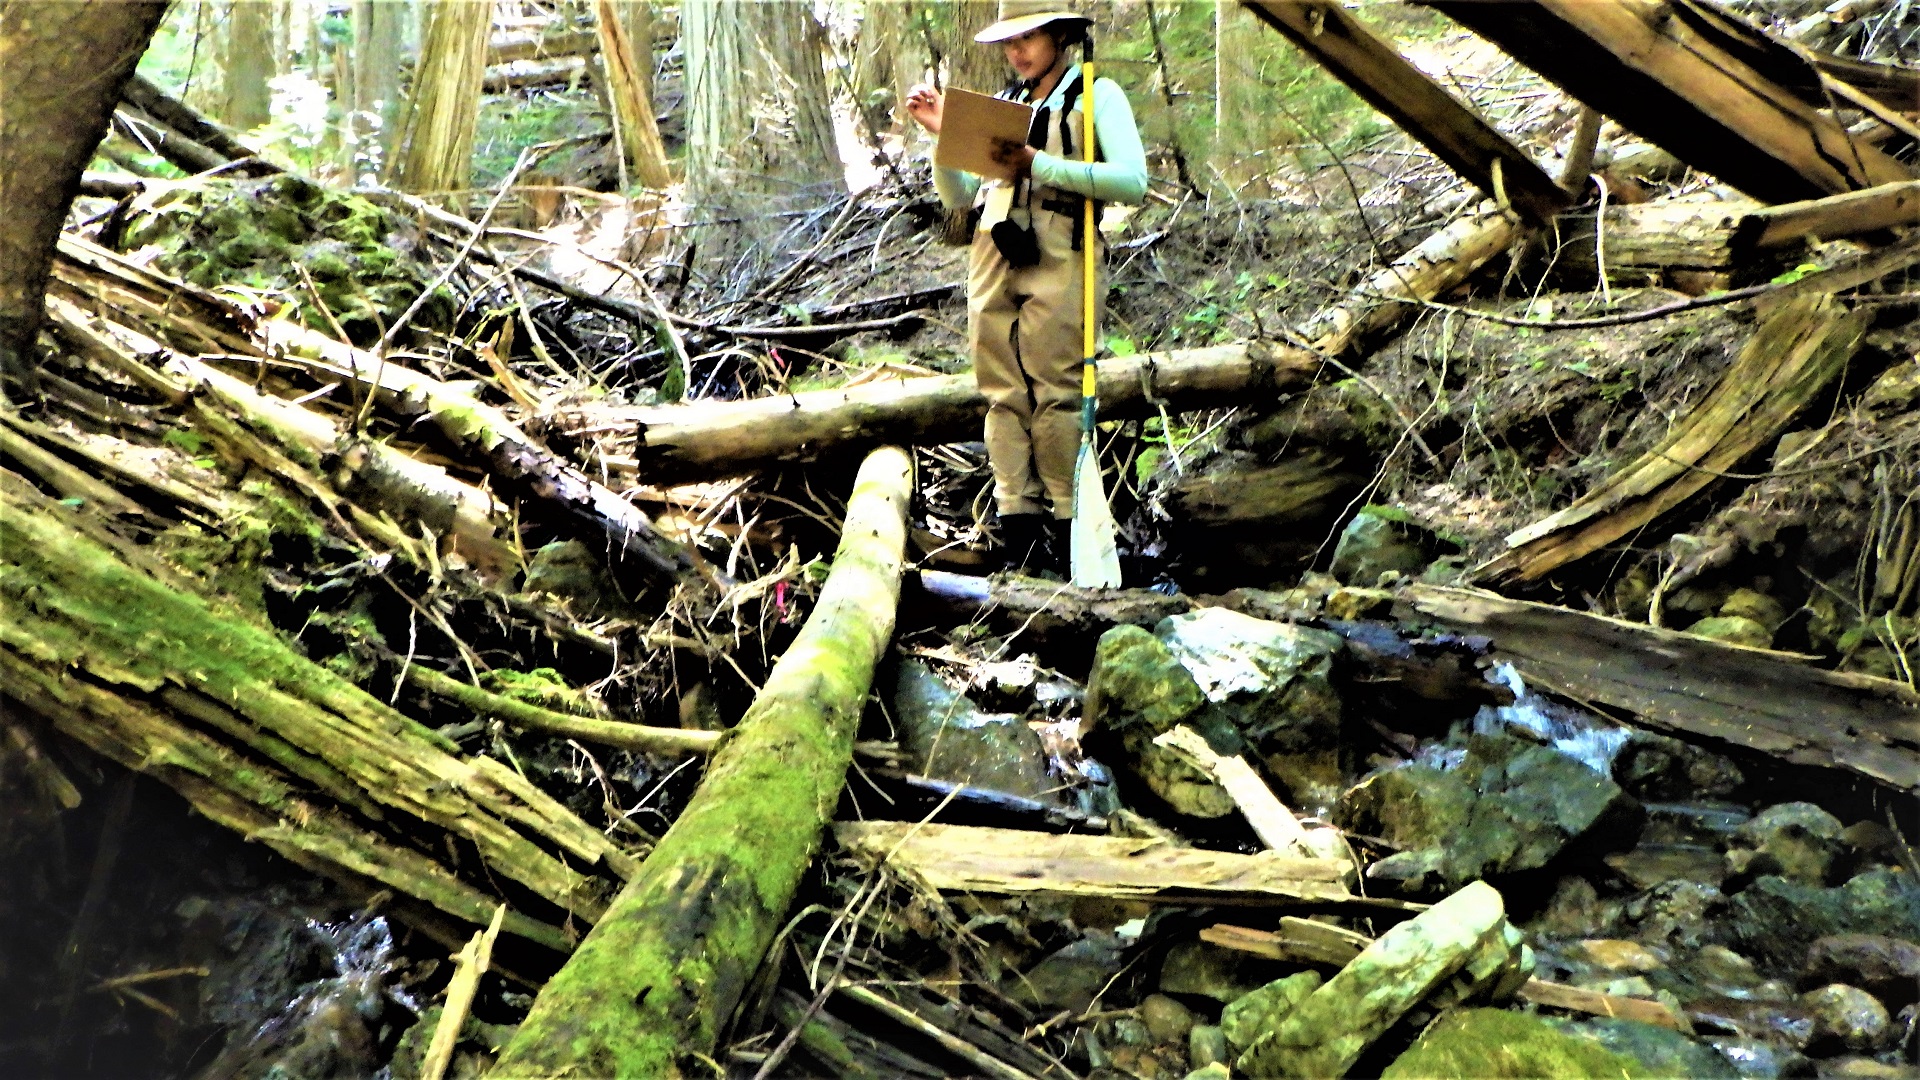 A crewmember recording a large pile of fallen wood in a notebook.